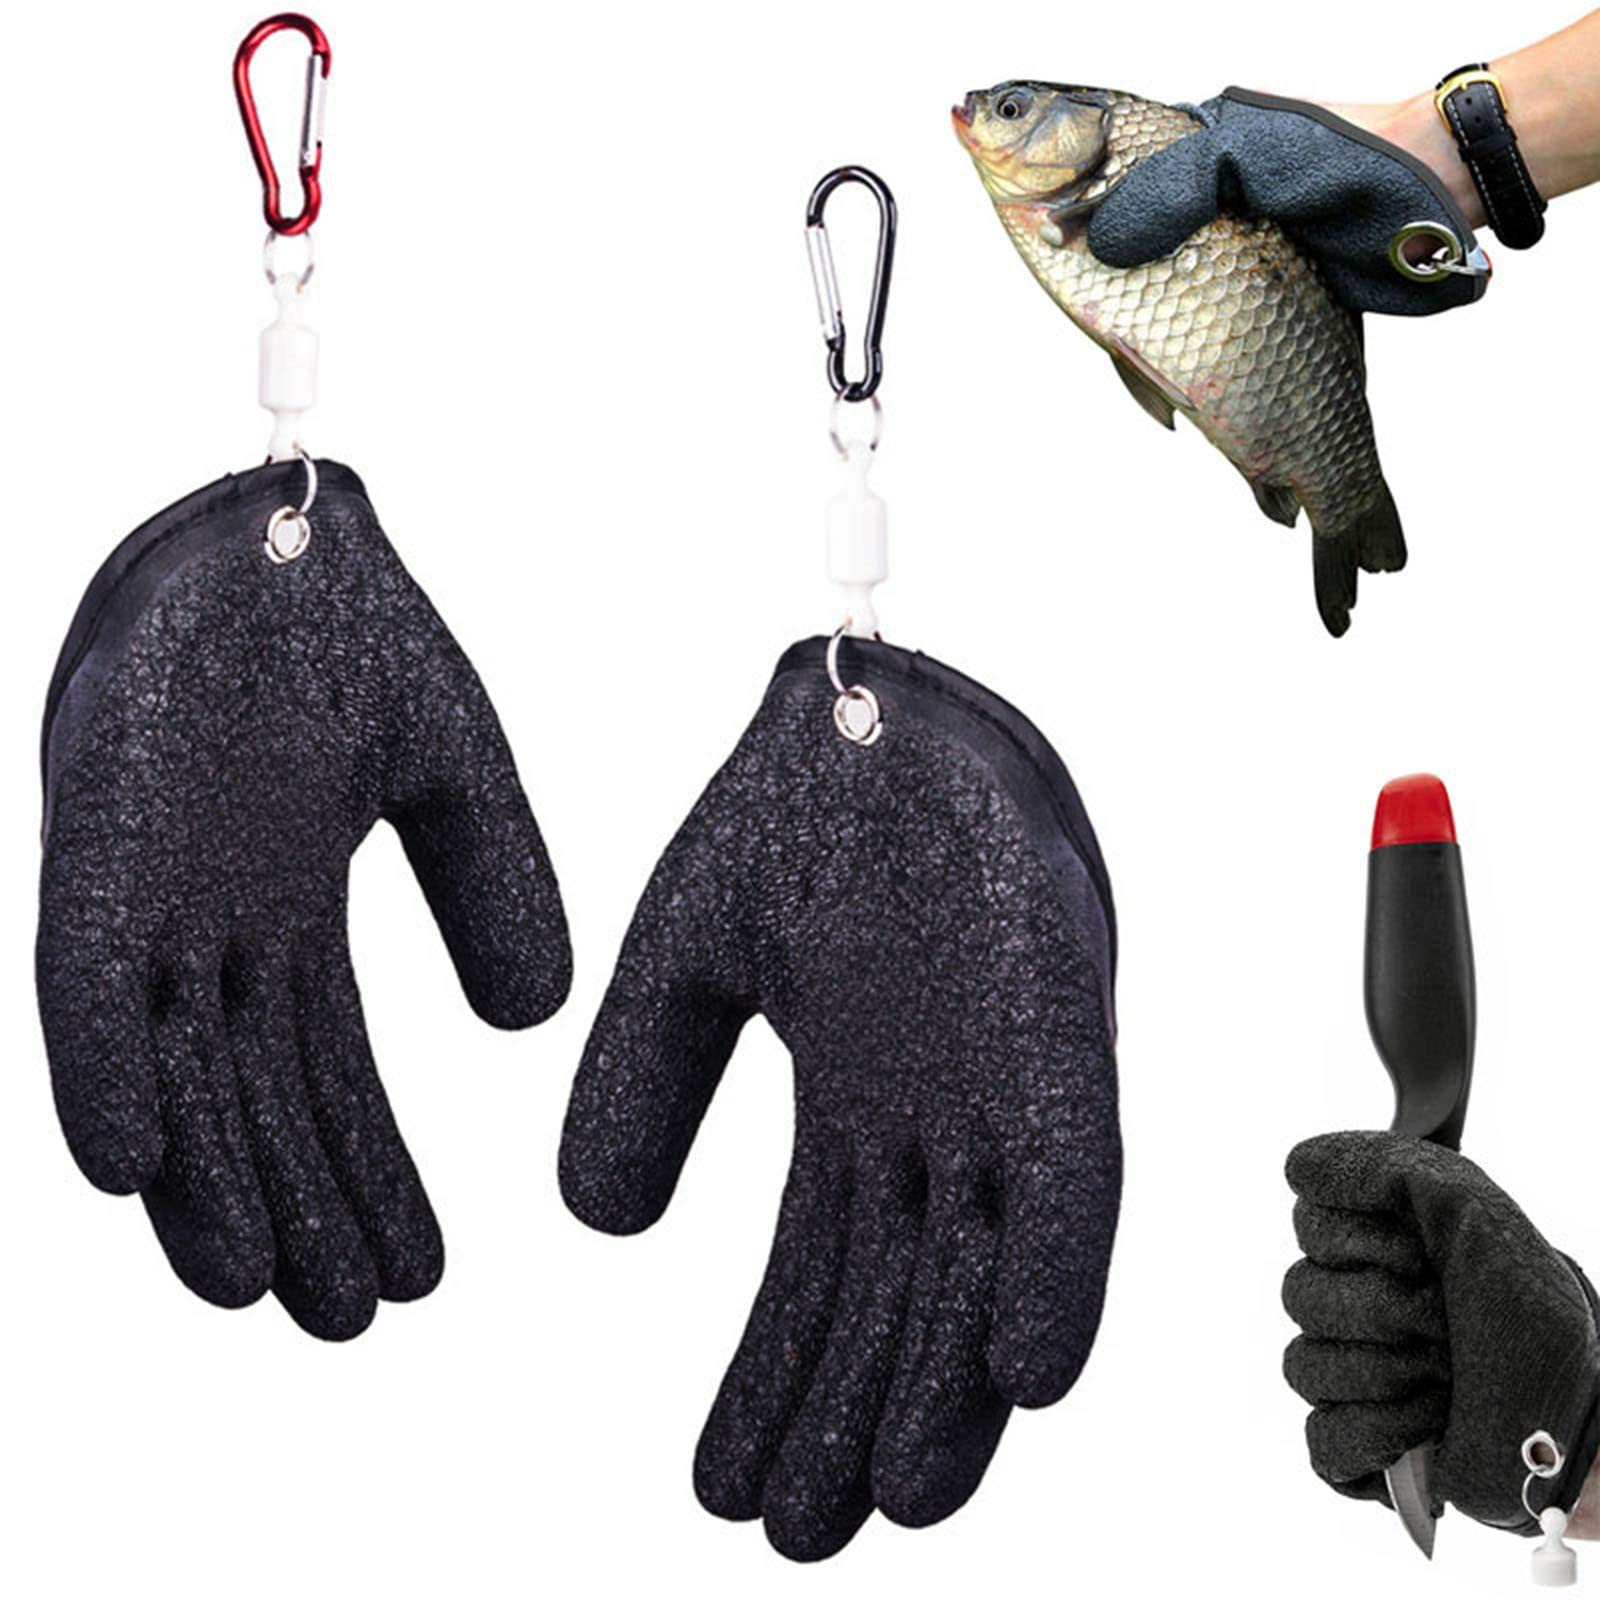  Kicikol Lilybady - Top Fishing Gloves, Fishing Catching Gloves  Non-Slip Fisherman Protect Hand, Lilybaby Fishing Glove, Fishing Catching  Gloves from Puncture Scrapes with Magnet Release-Black : Sports & Outdoors